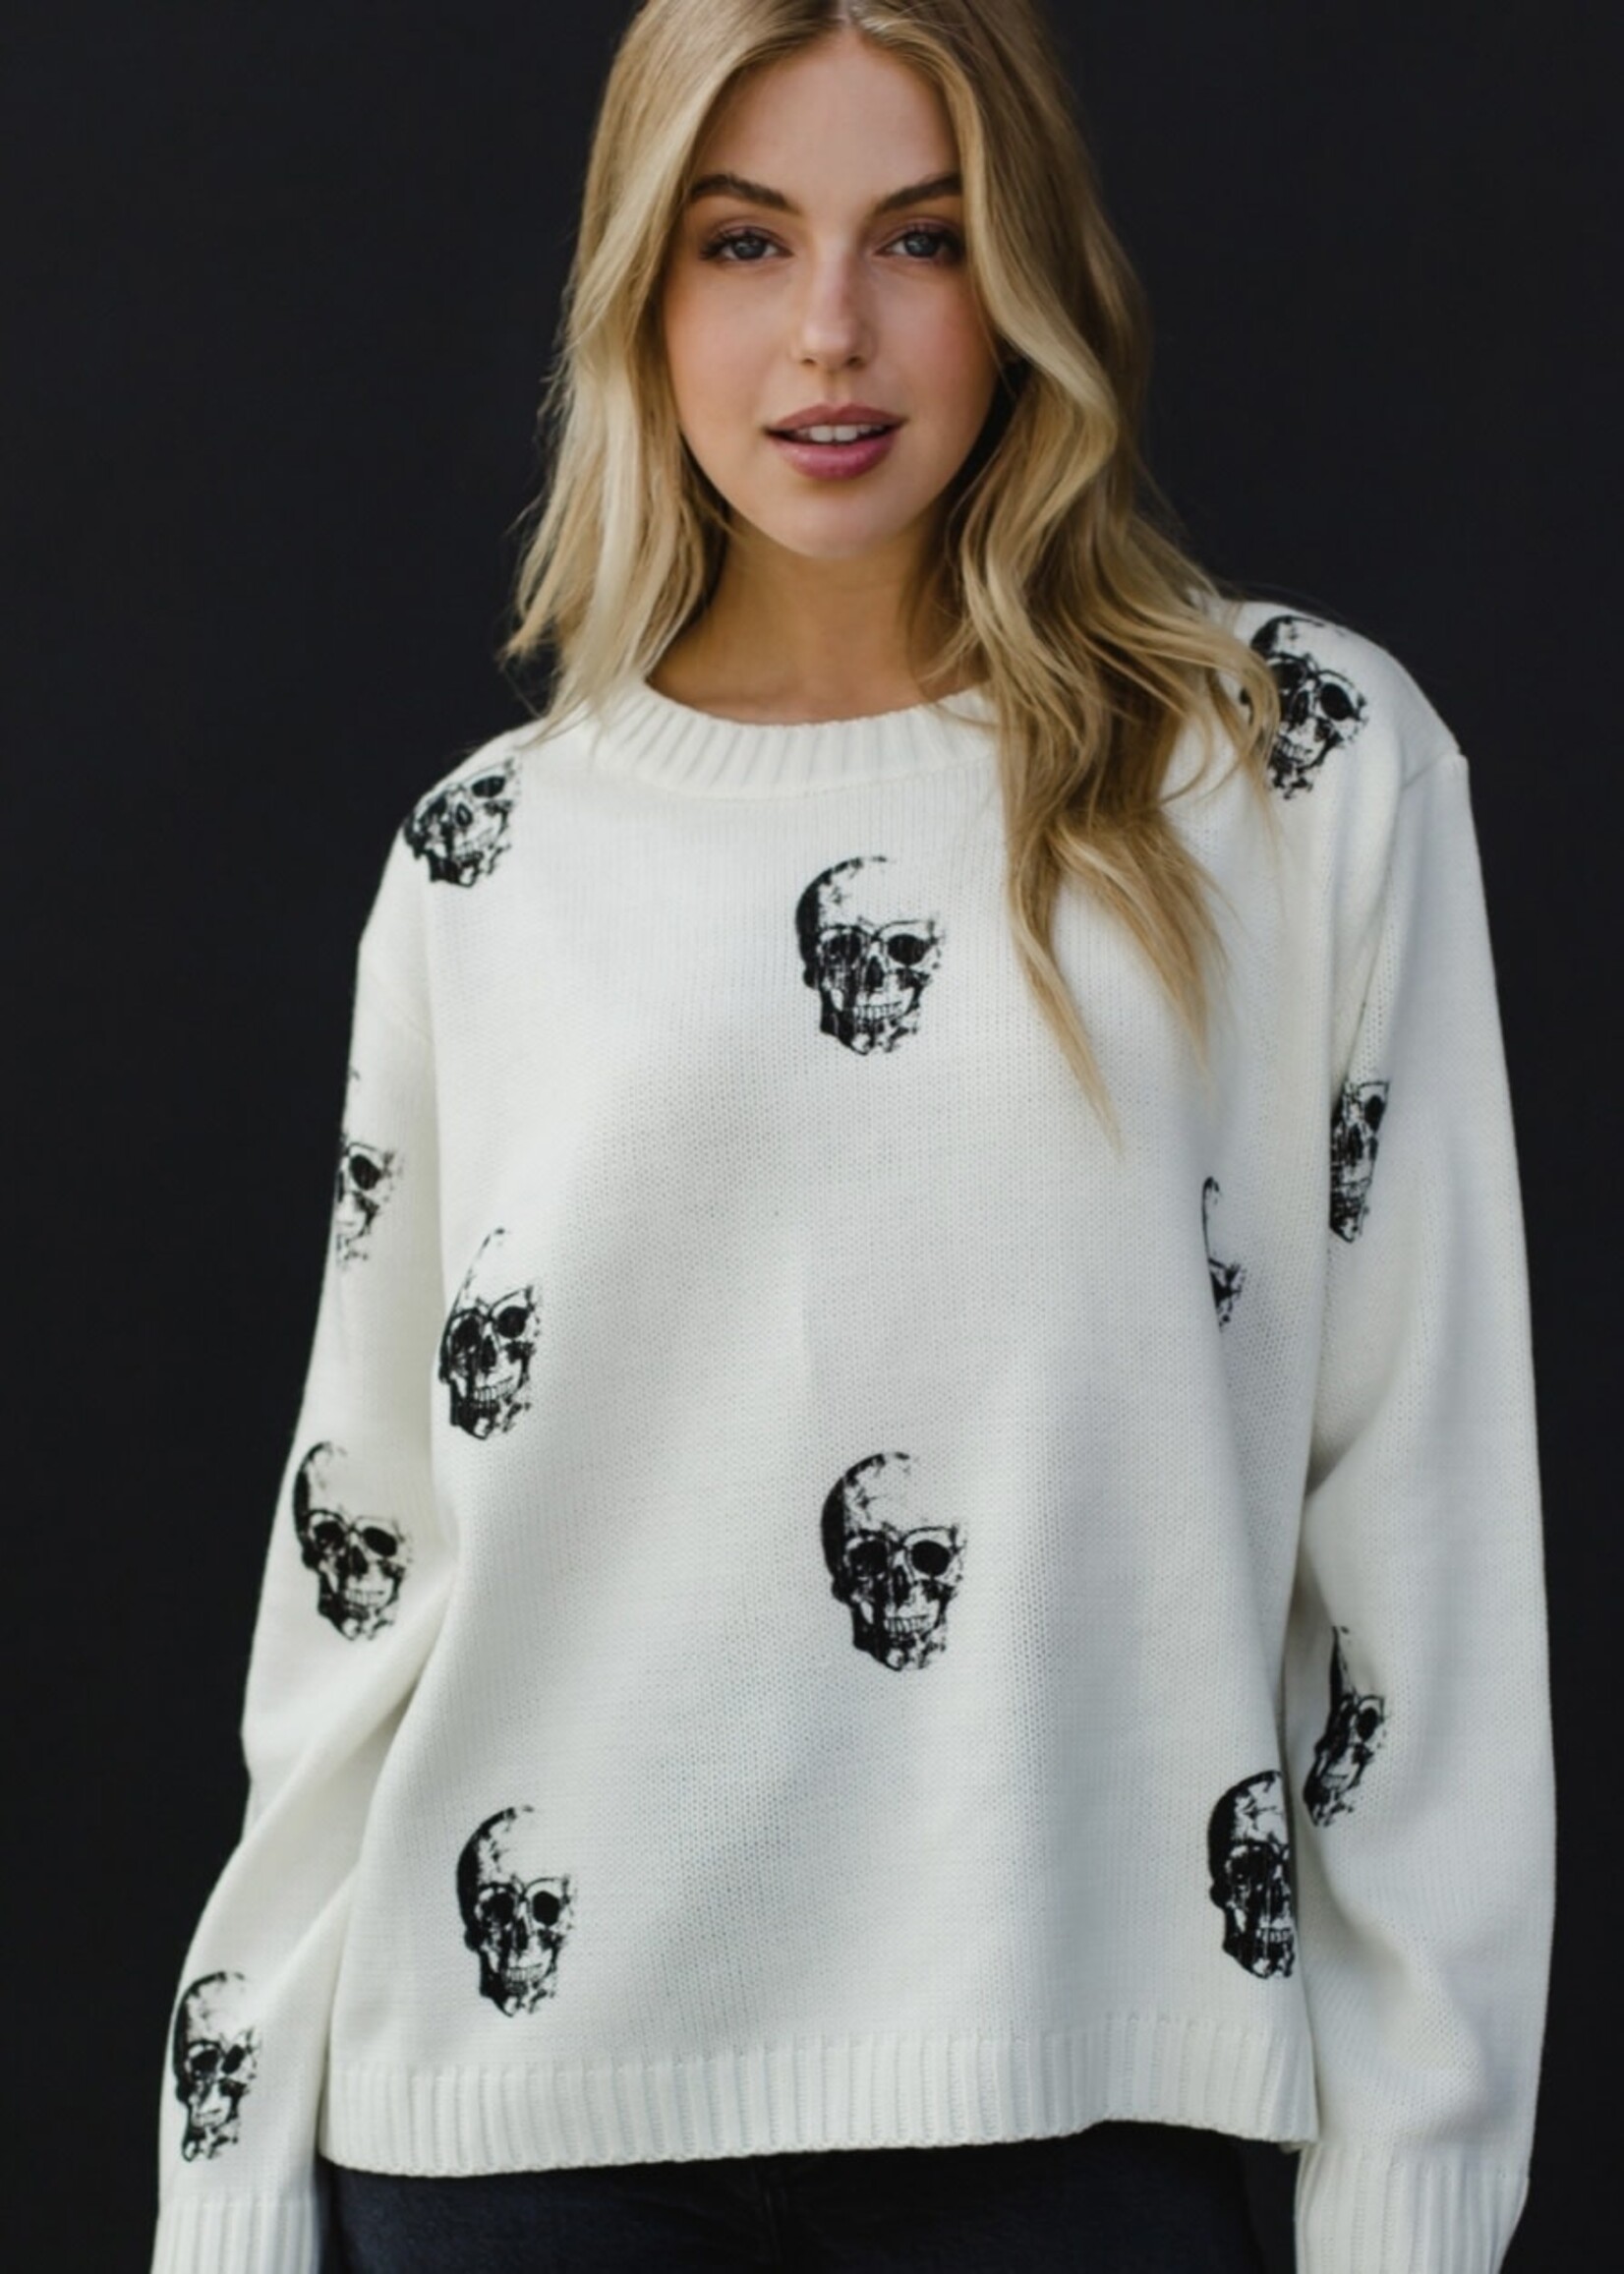 Spooky Vibes Sweater